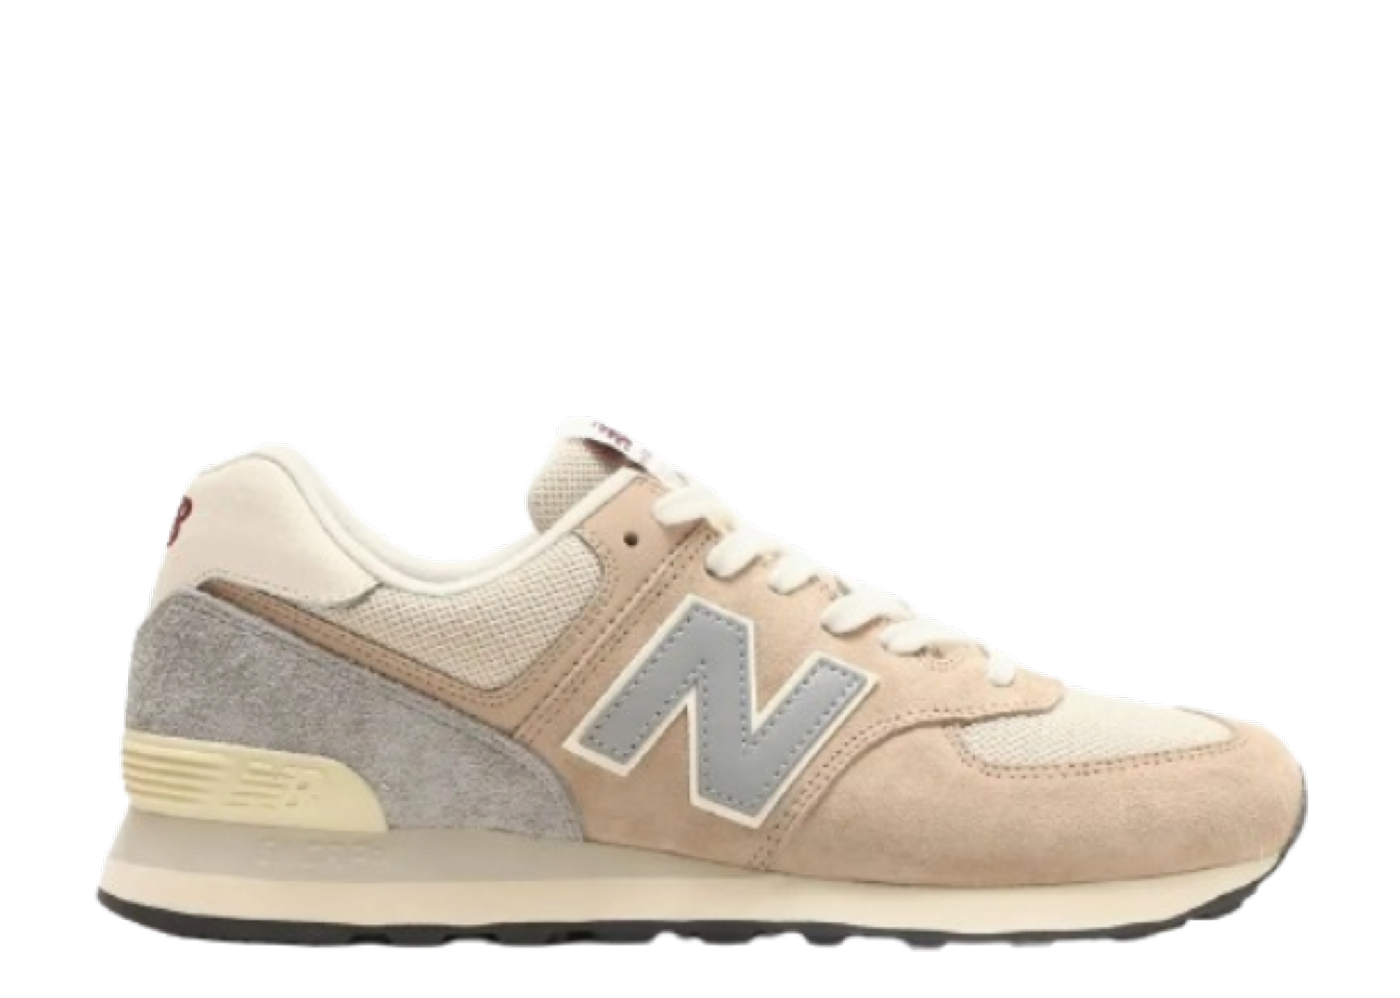 Even at Full Price, the New Balance 574 Sneakers Are a Bona Fide